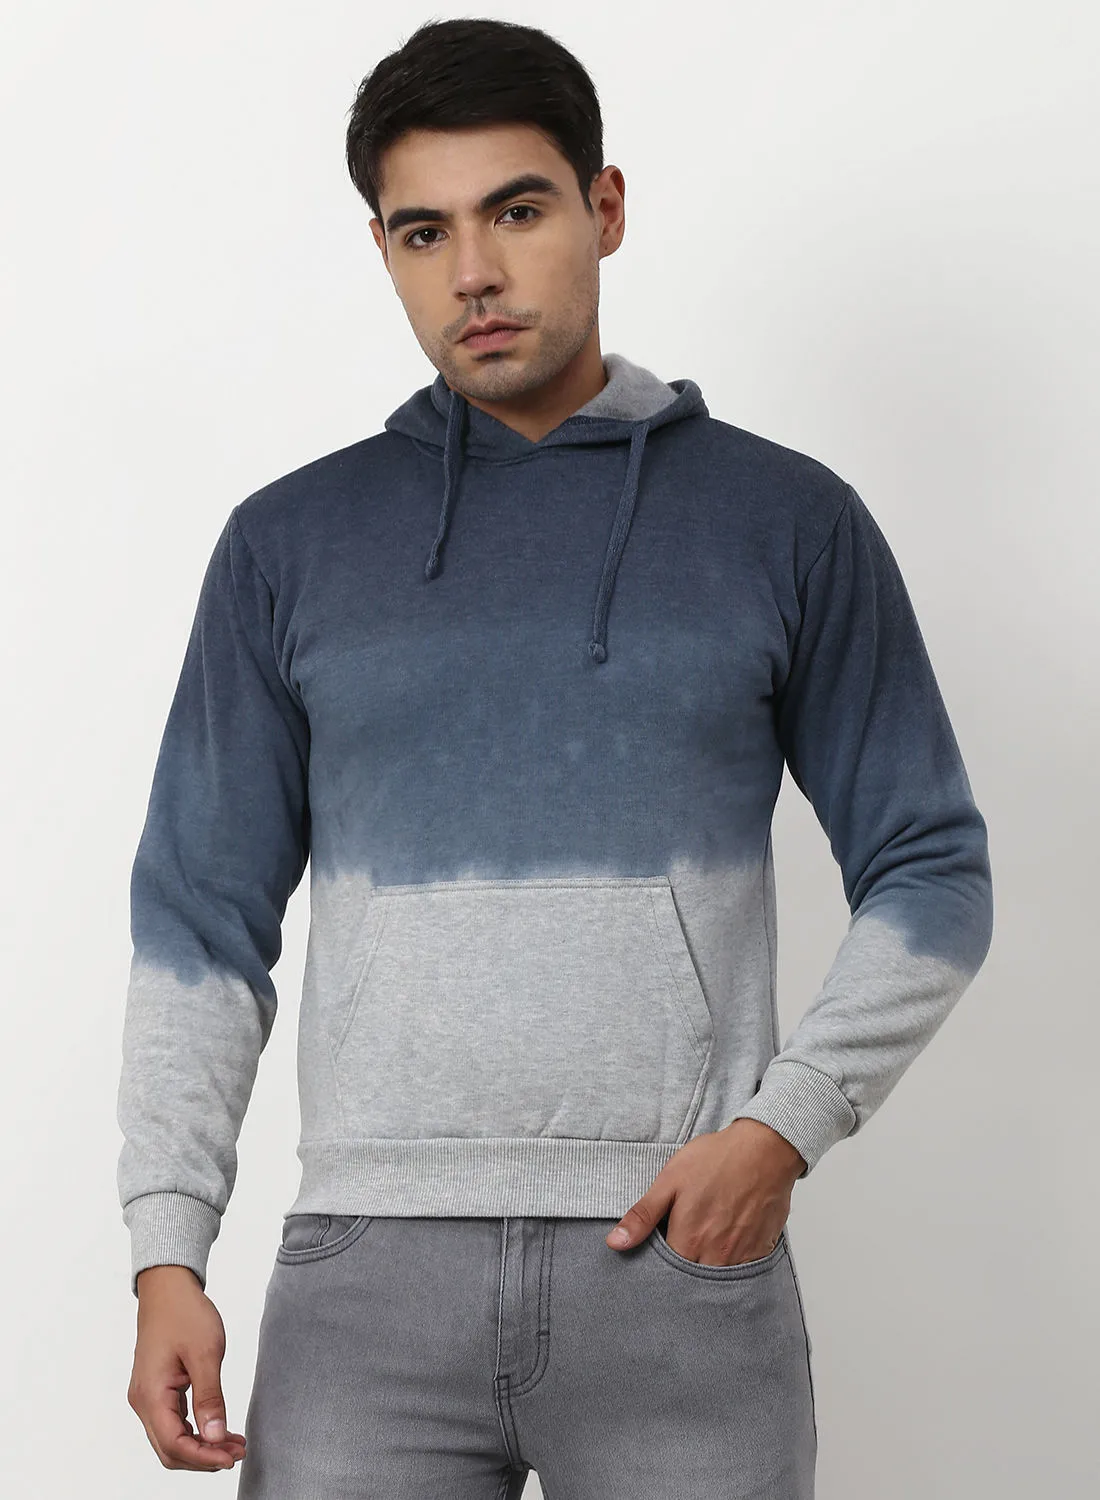 Campus Sutra Stylish Comfortable Hoodie Light Grey/Blue